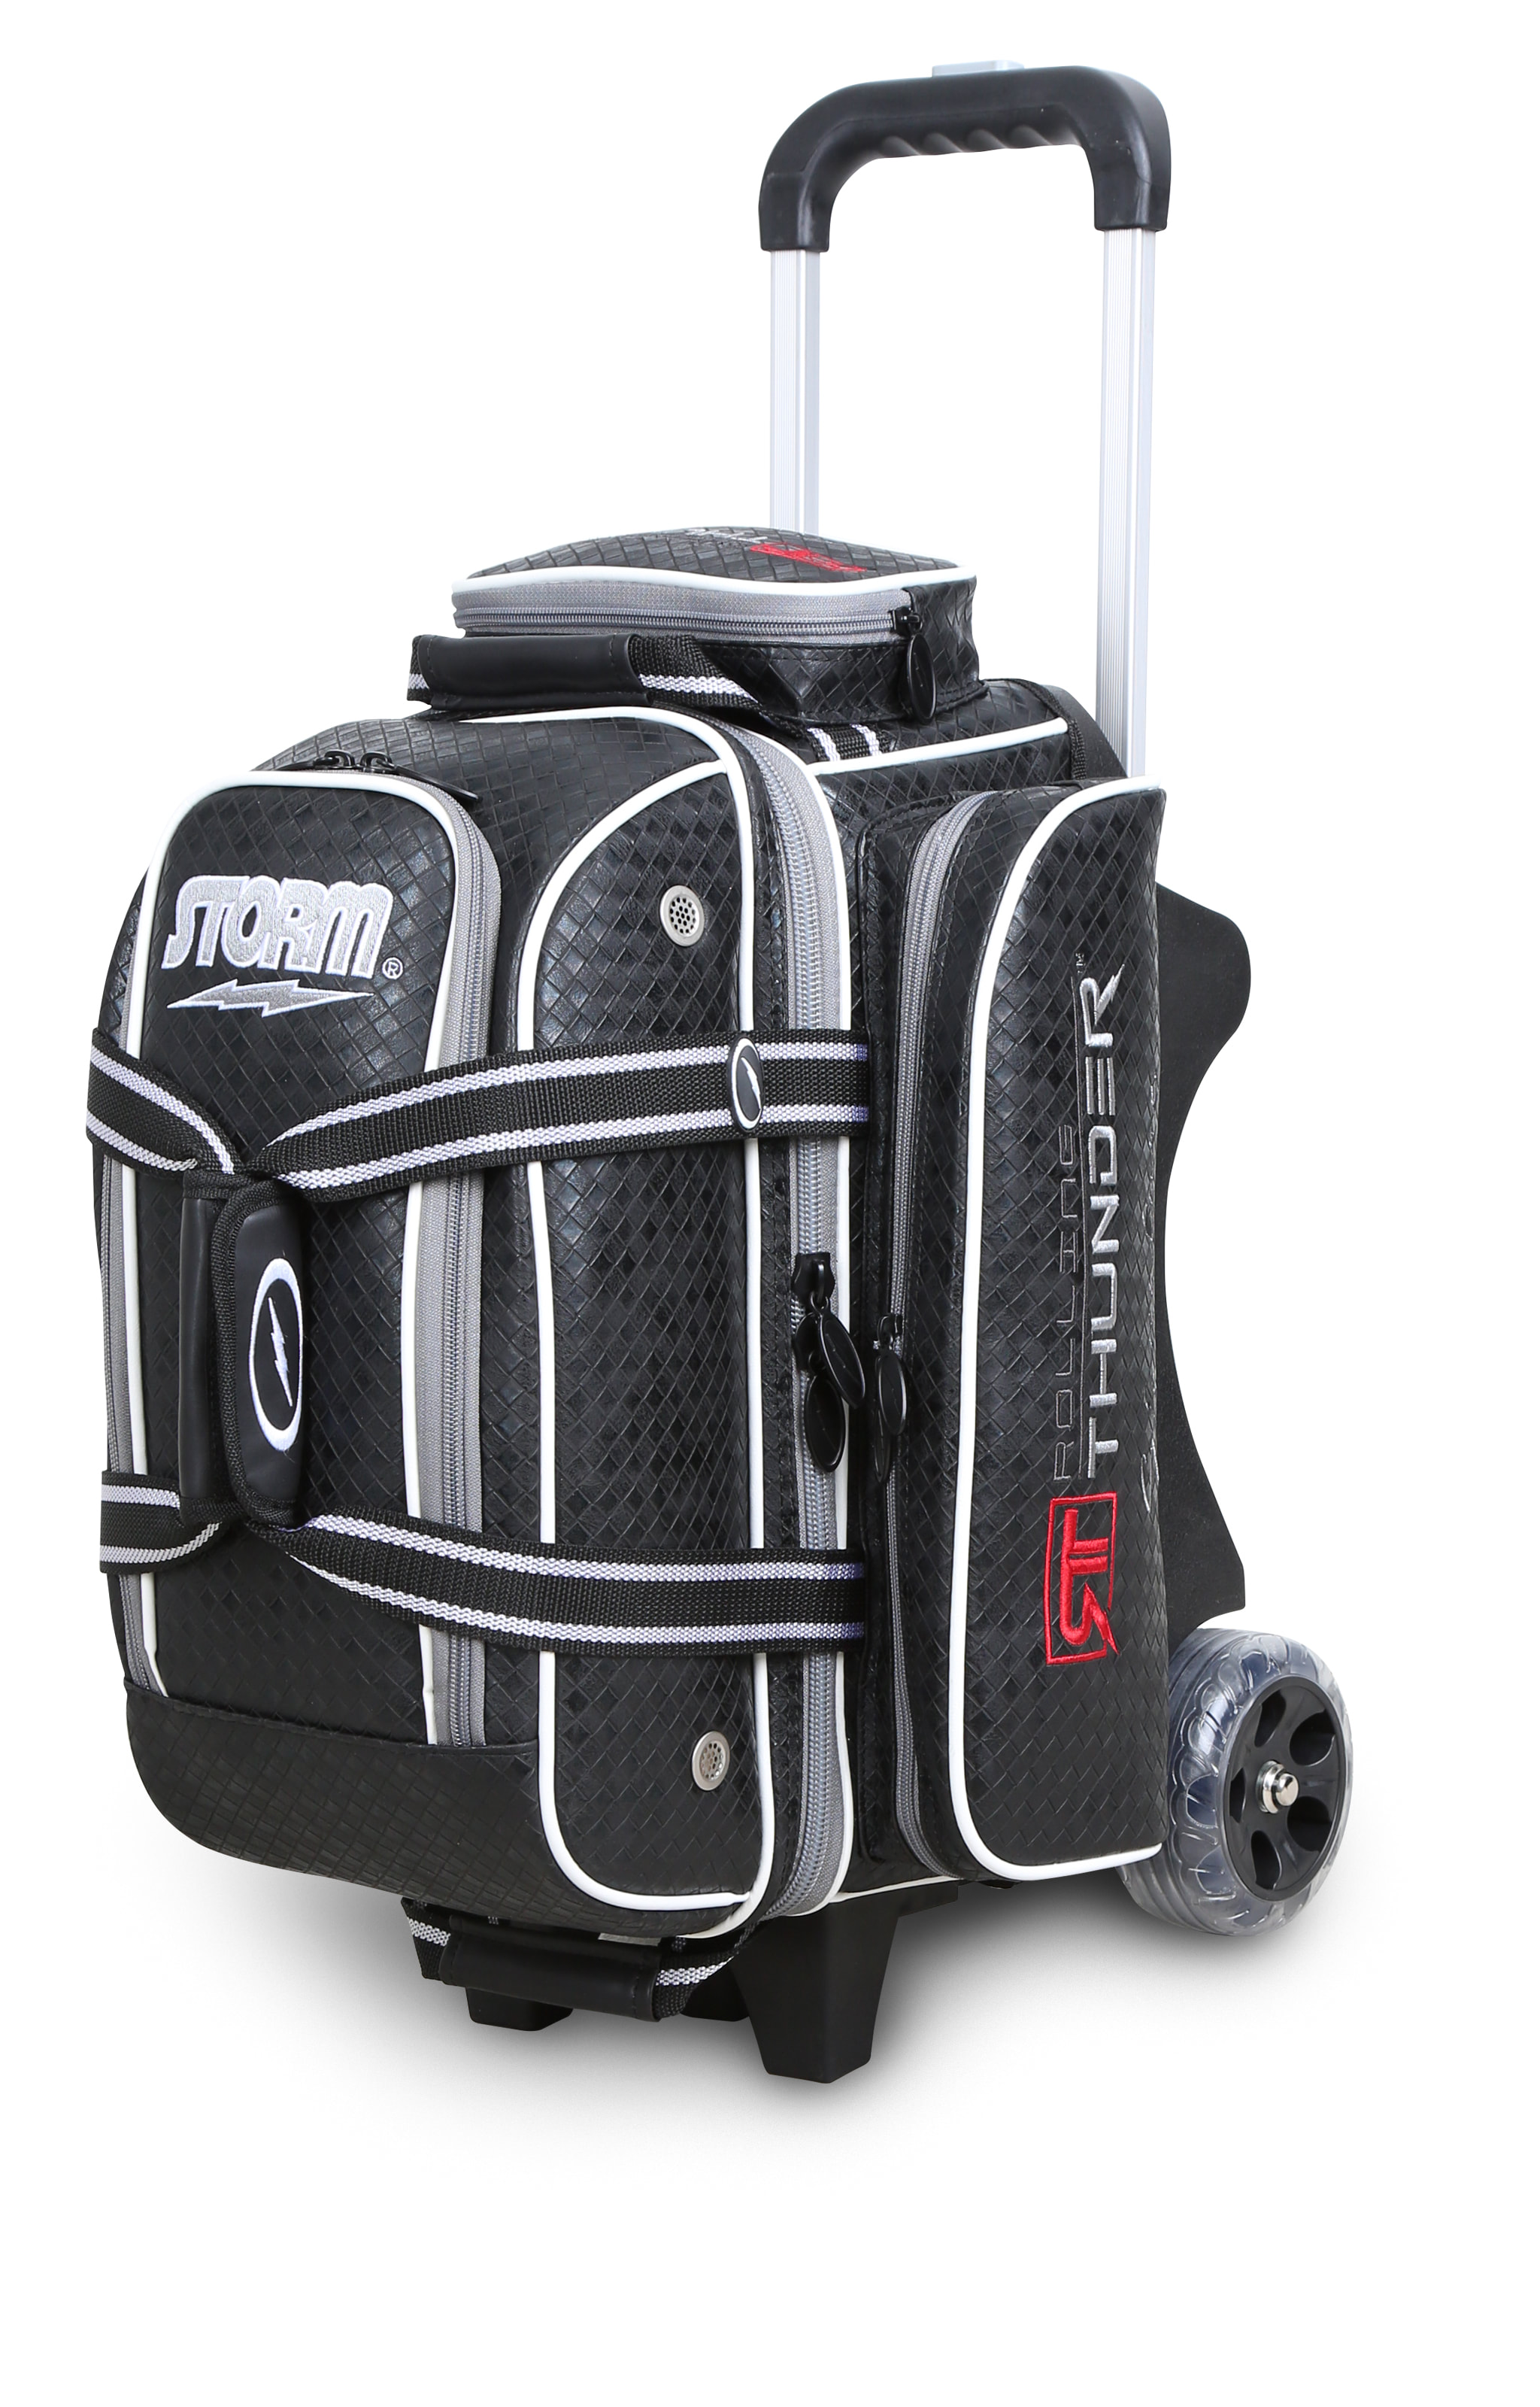 THE COMMANDO 2 BALL DOUBLE ROLLER BOWLING BAG in GRAY & BLACK ~ BRAND NEW 